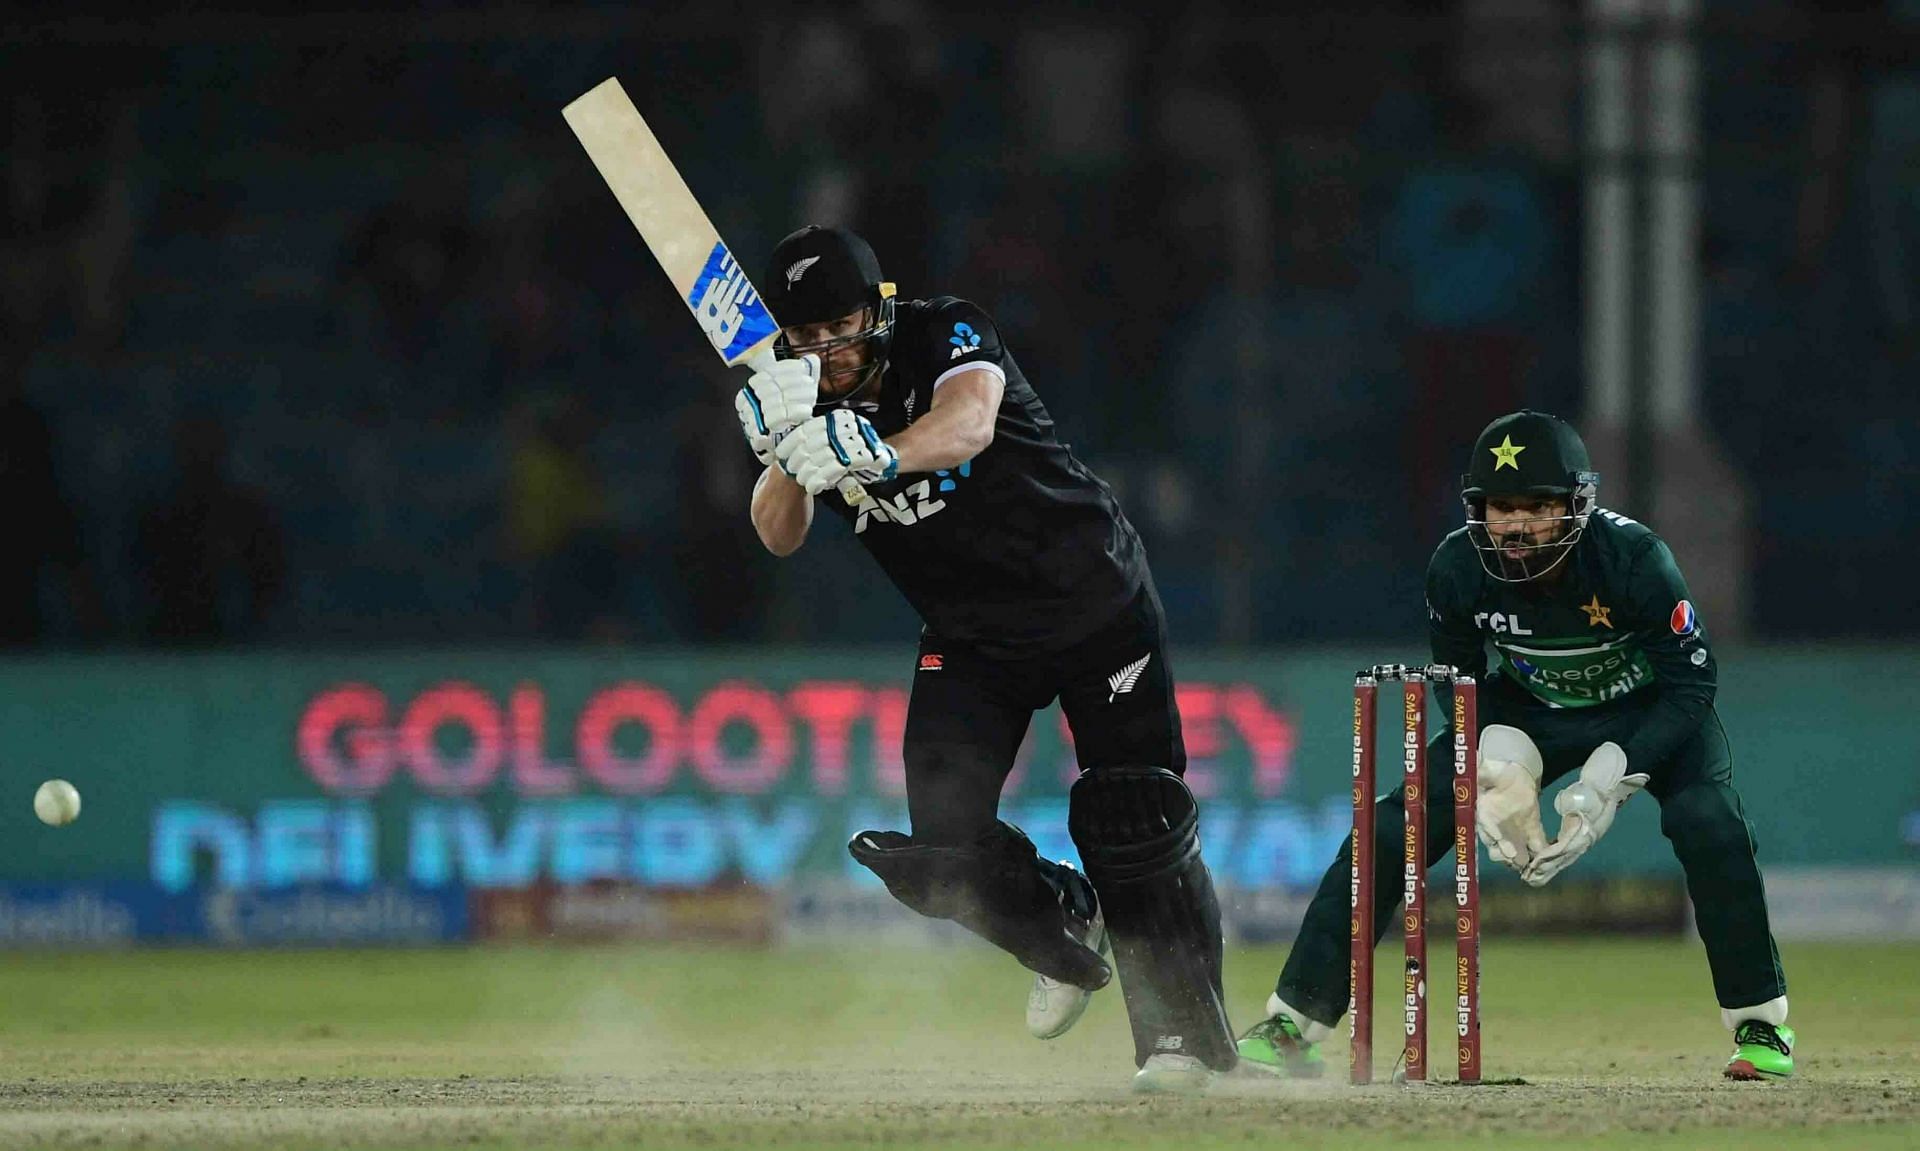 Glenn Phillips played a blinder of a knock batting at no.7 to help New Zealand come from behind and win the recently concluded ODI series.